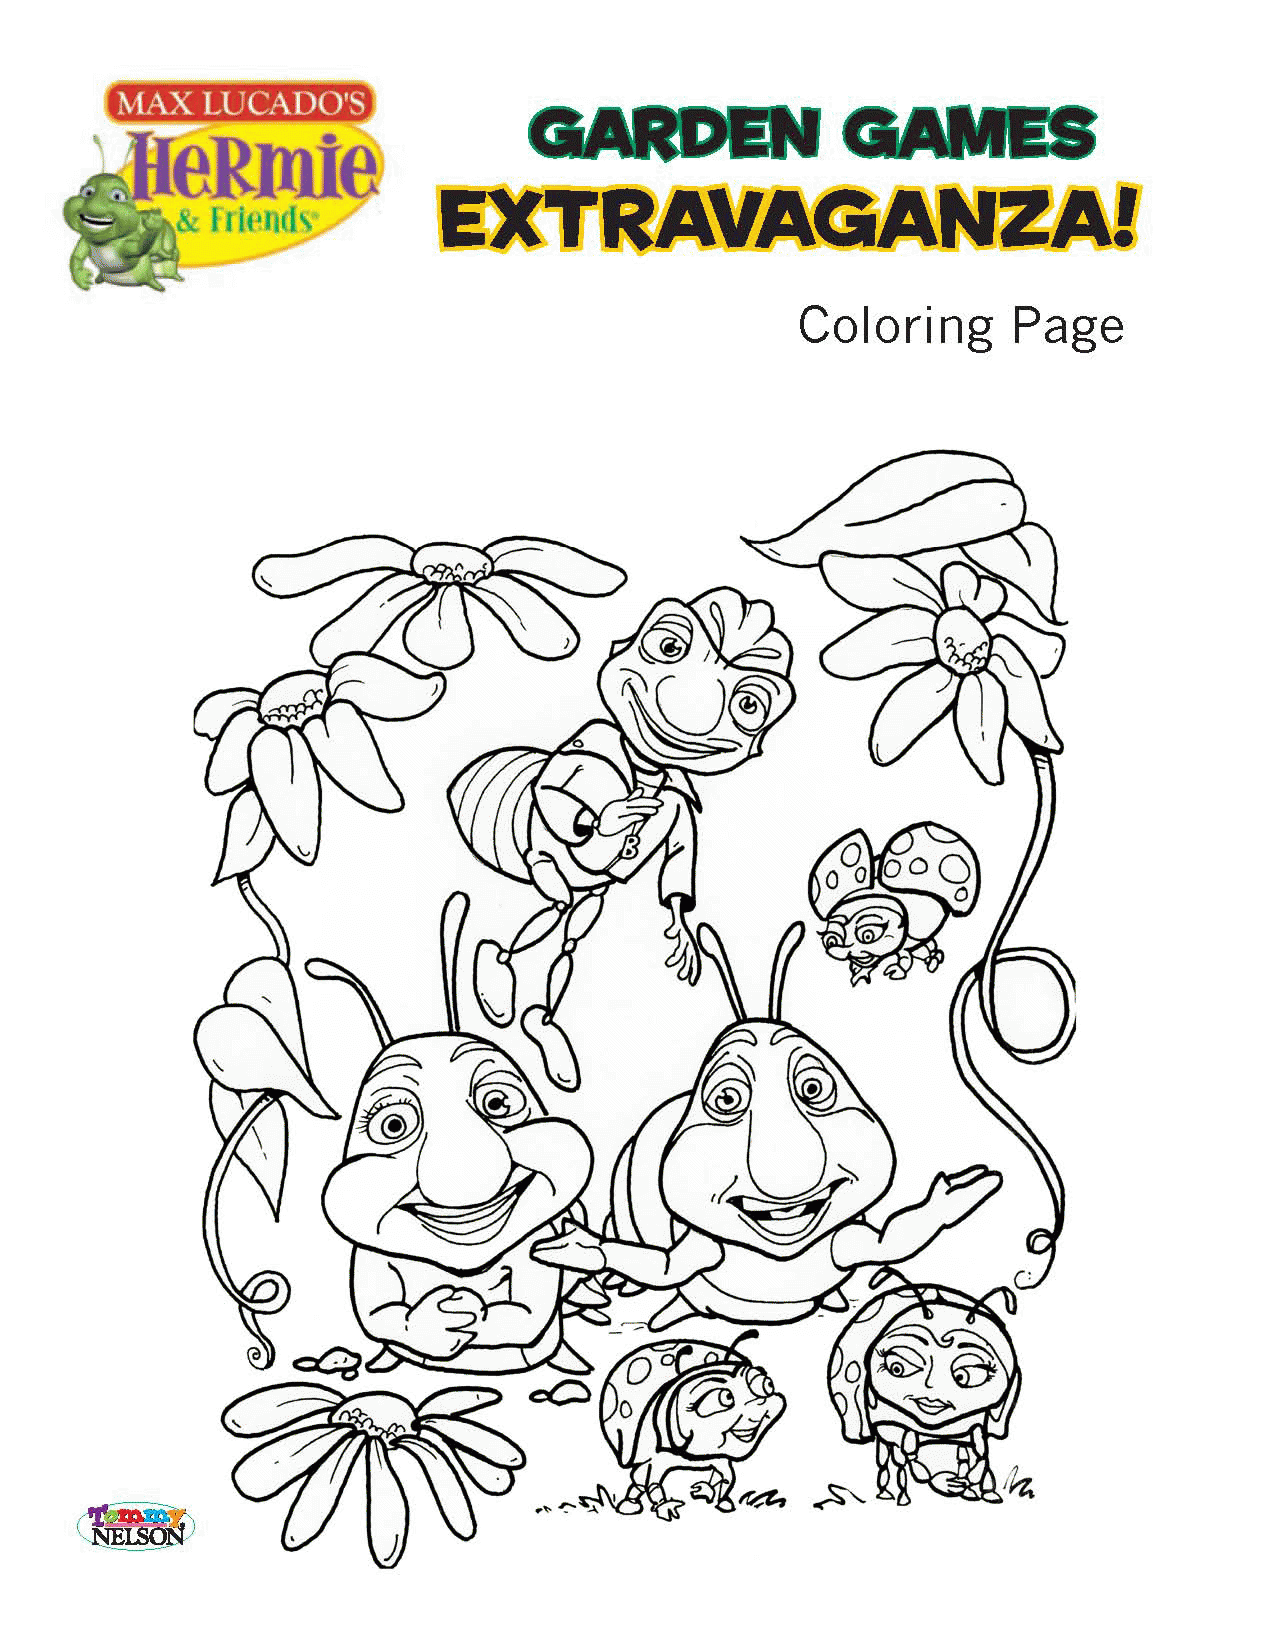 Hermie and friends coloring page